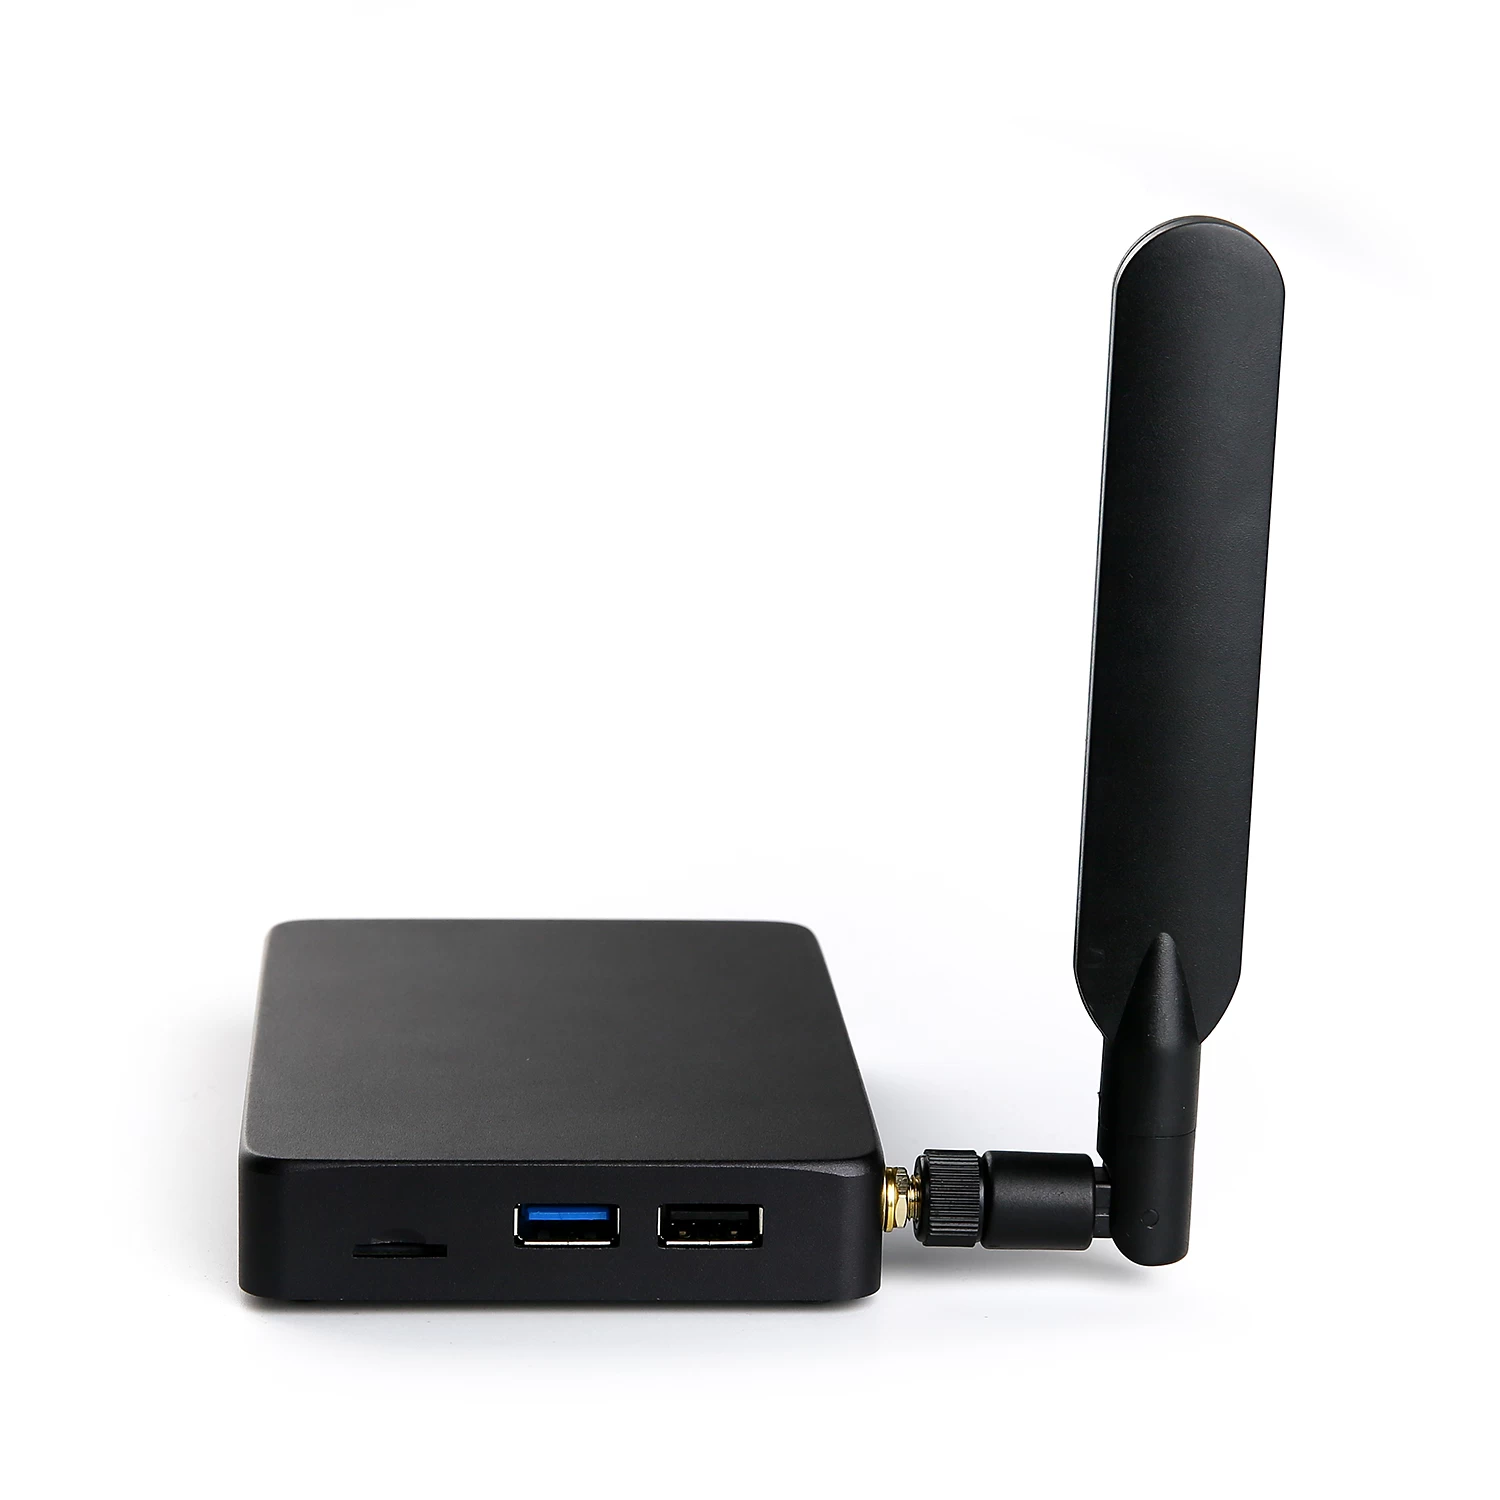 Elevate Now Mini PC HDMI Android - Realtek RTD1295 the Best Android Mini PC with HDMI Input - Explore the Possibilities